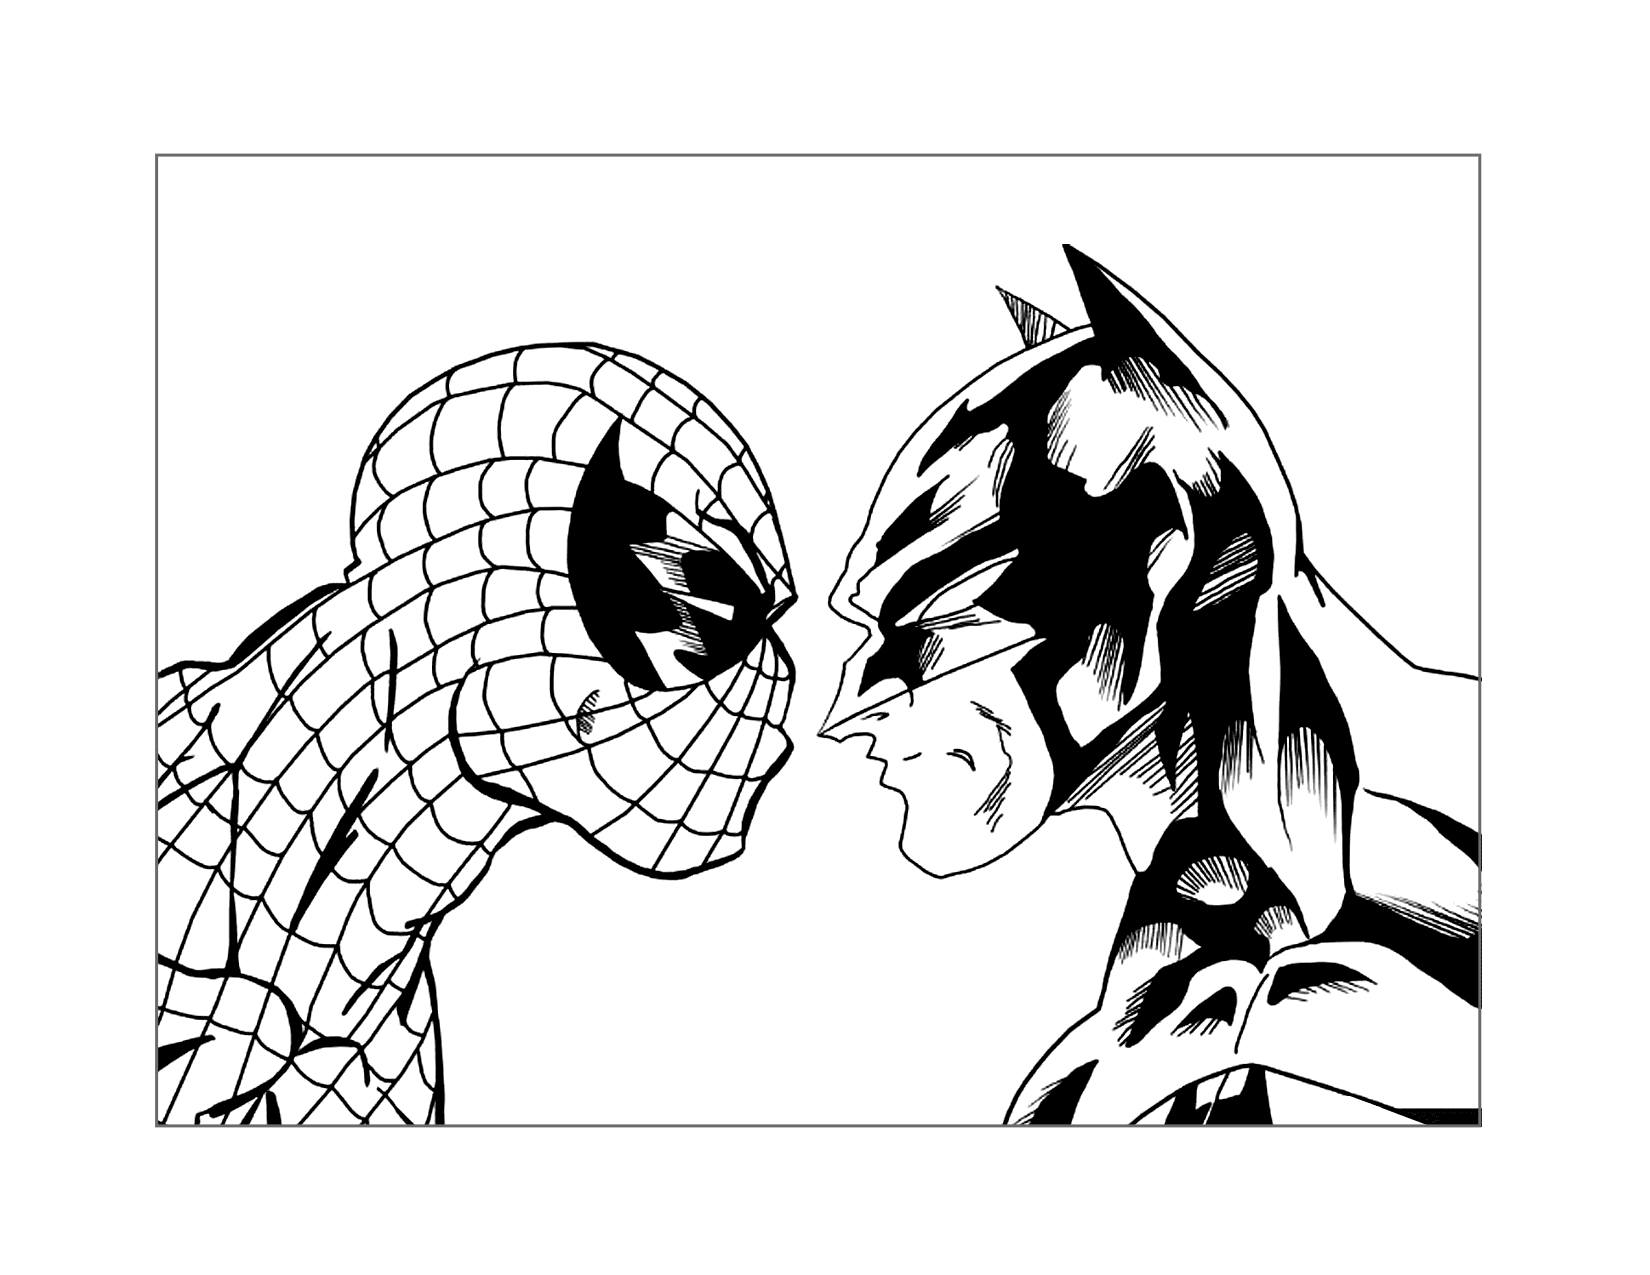 Spiderman And Batman Faceoff Coloring Page